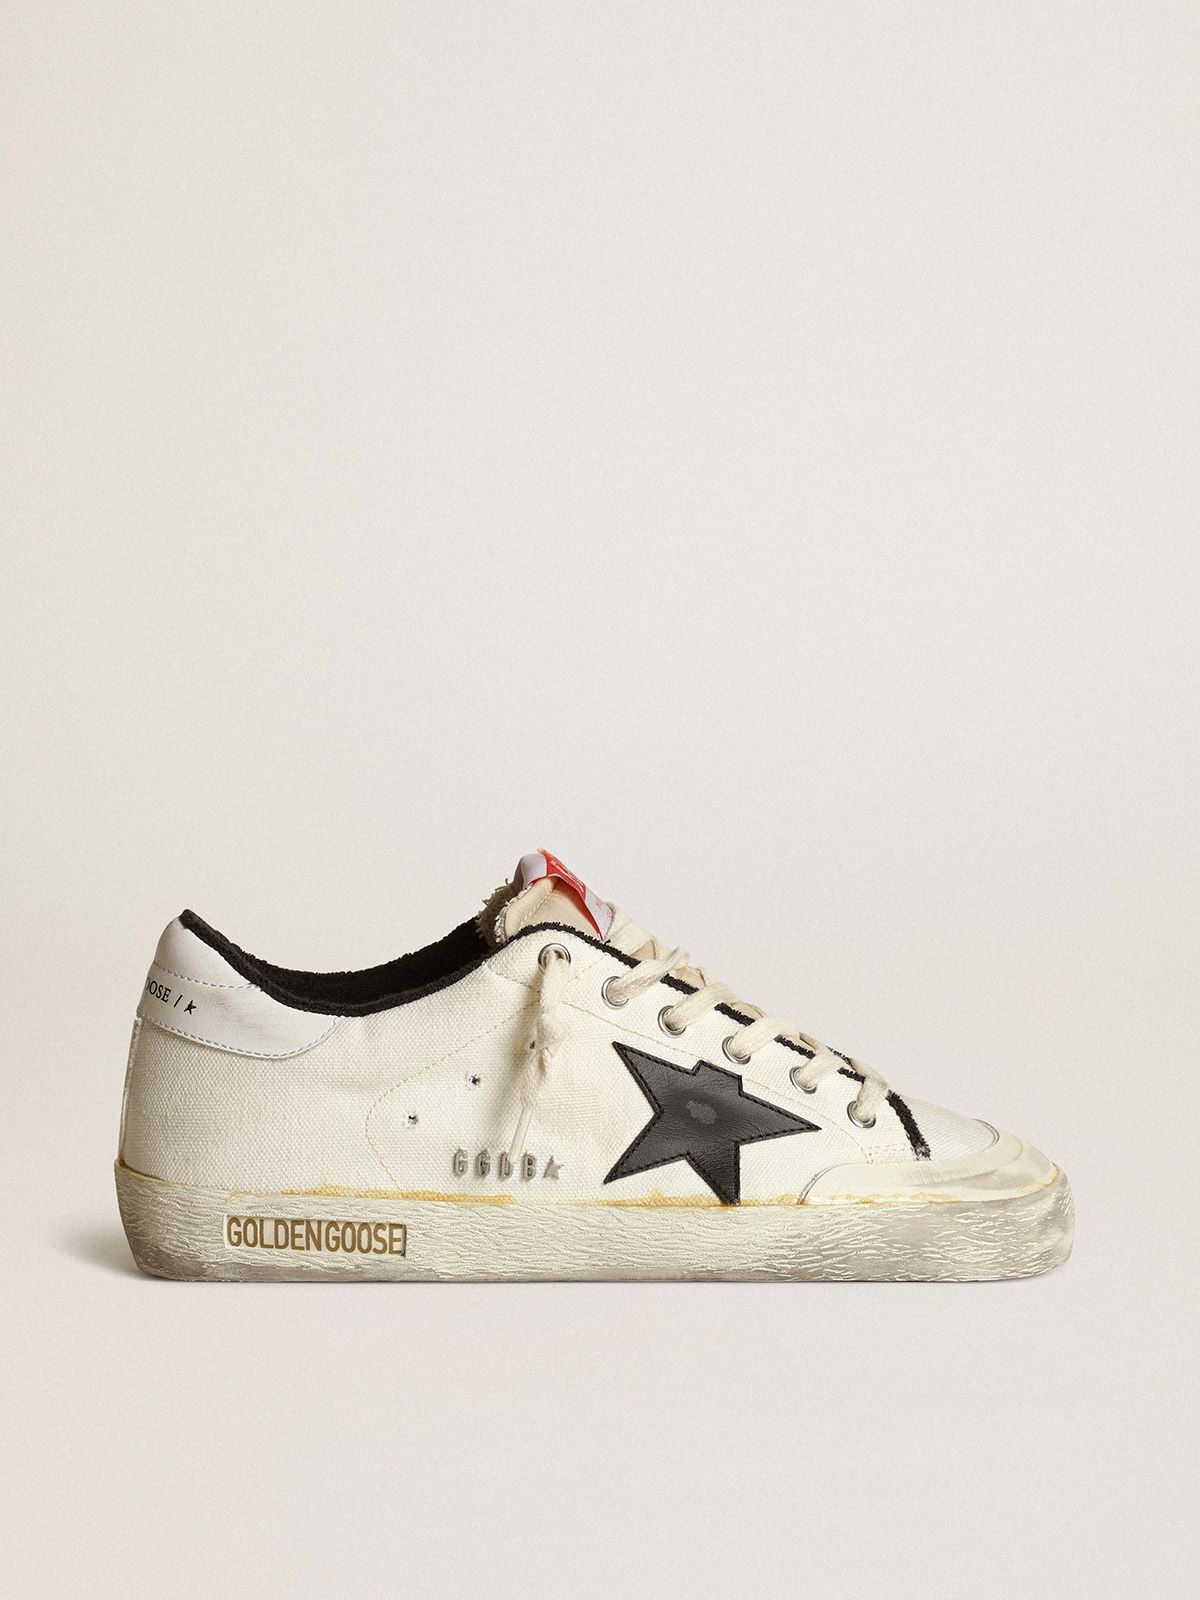 Dureza ventaja champán Men's Super-Star LTD sneakers in beige canvas with black leather star and  white leather heel tab | Golden Goose